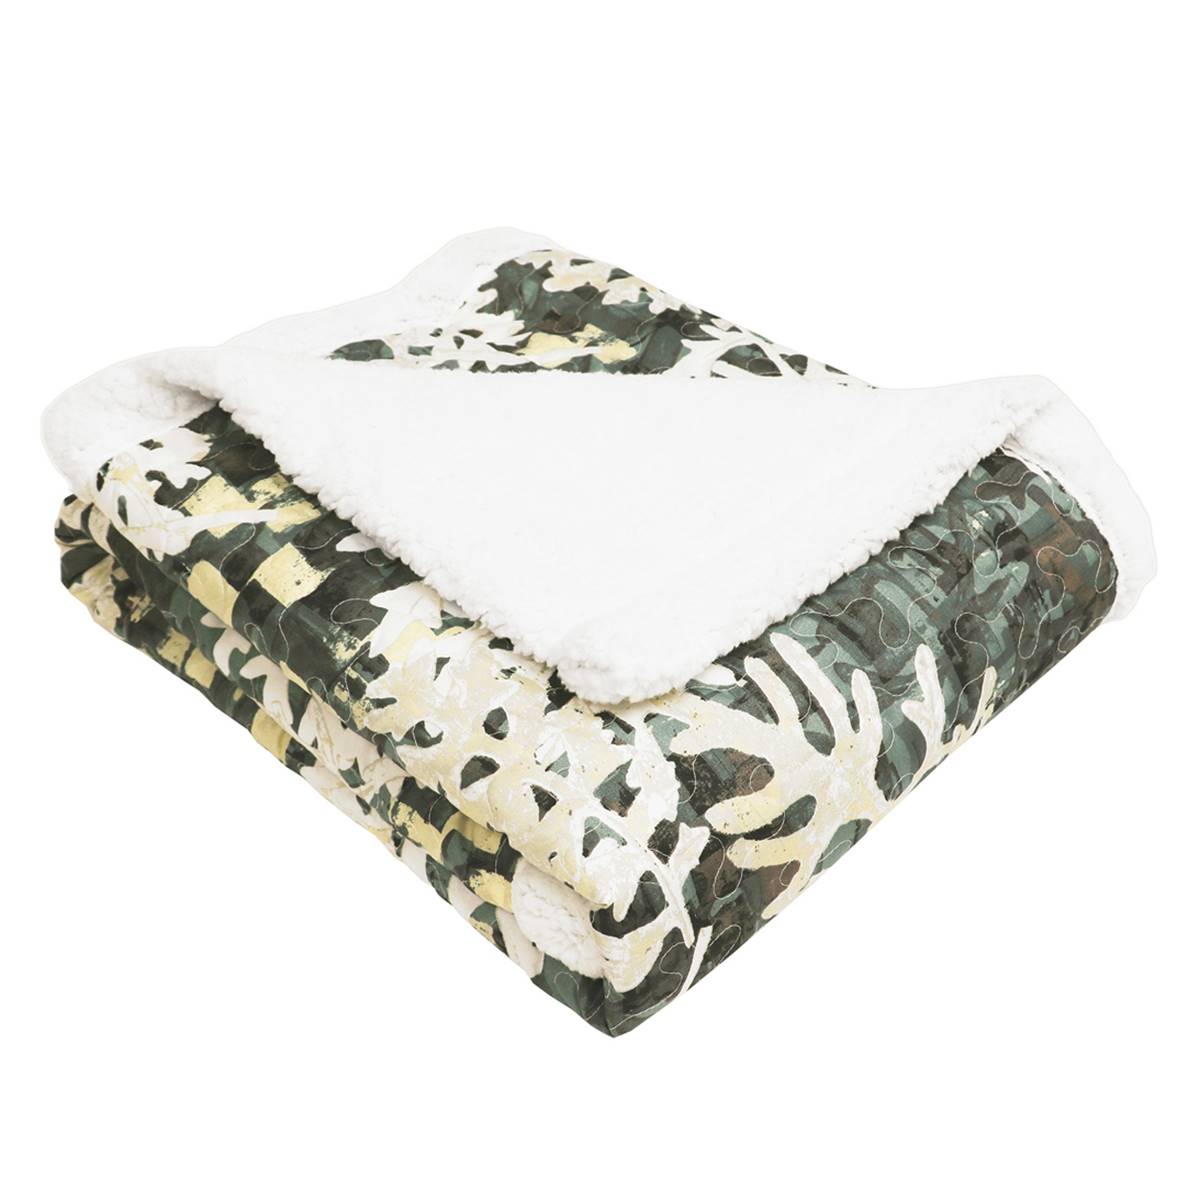 Lush Decor(R) Camouflage Leaves Sherpa Throw